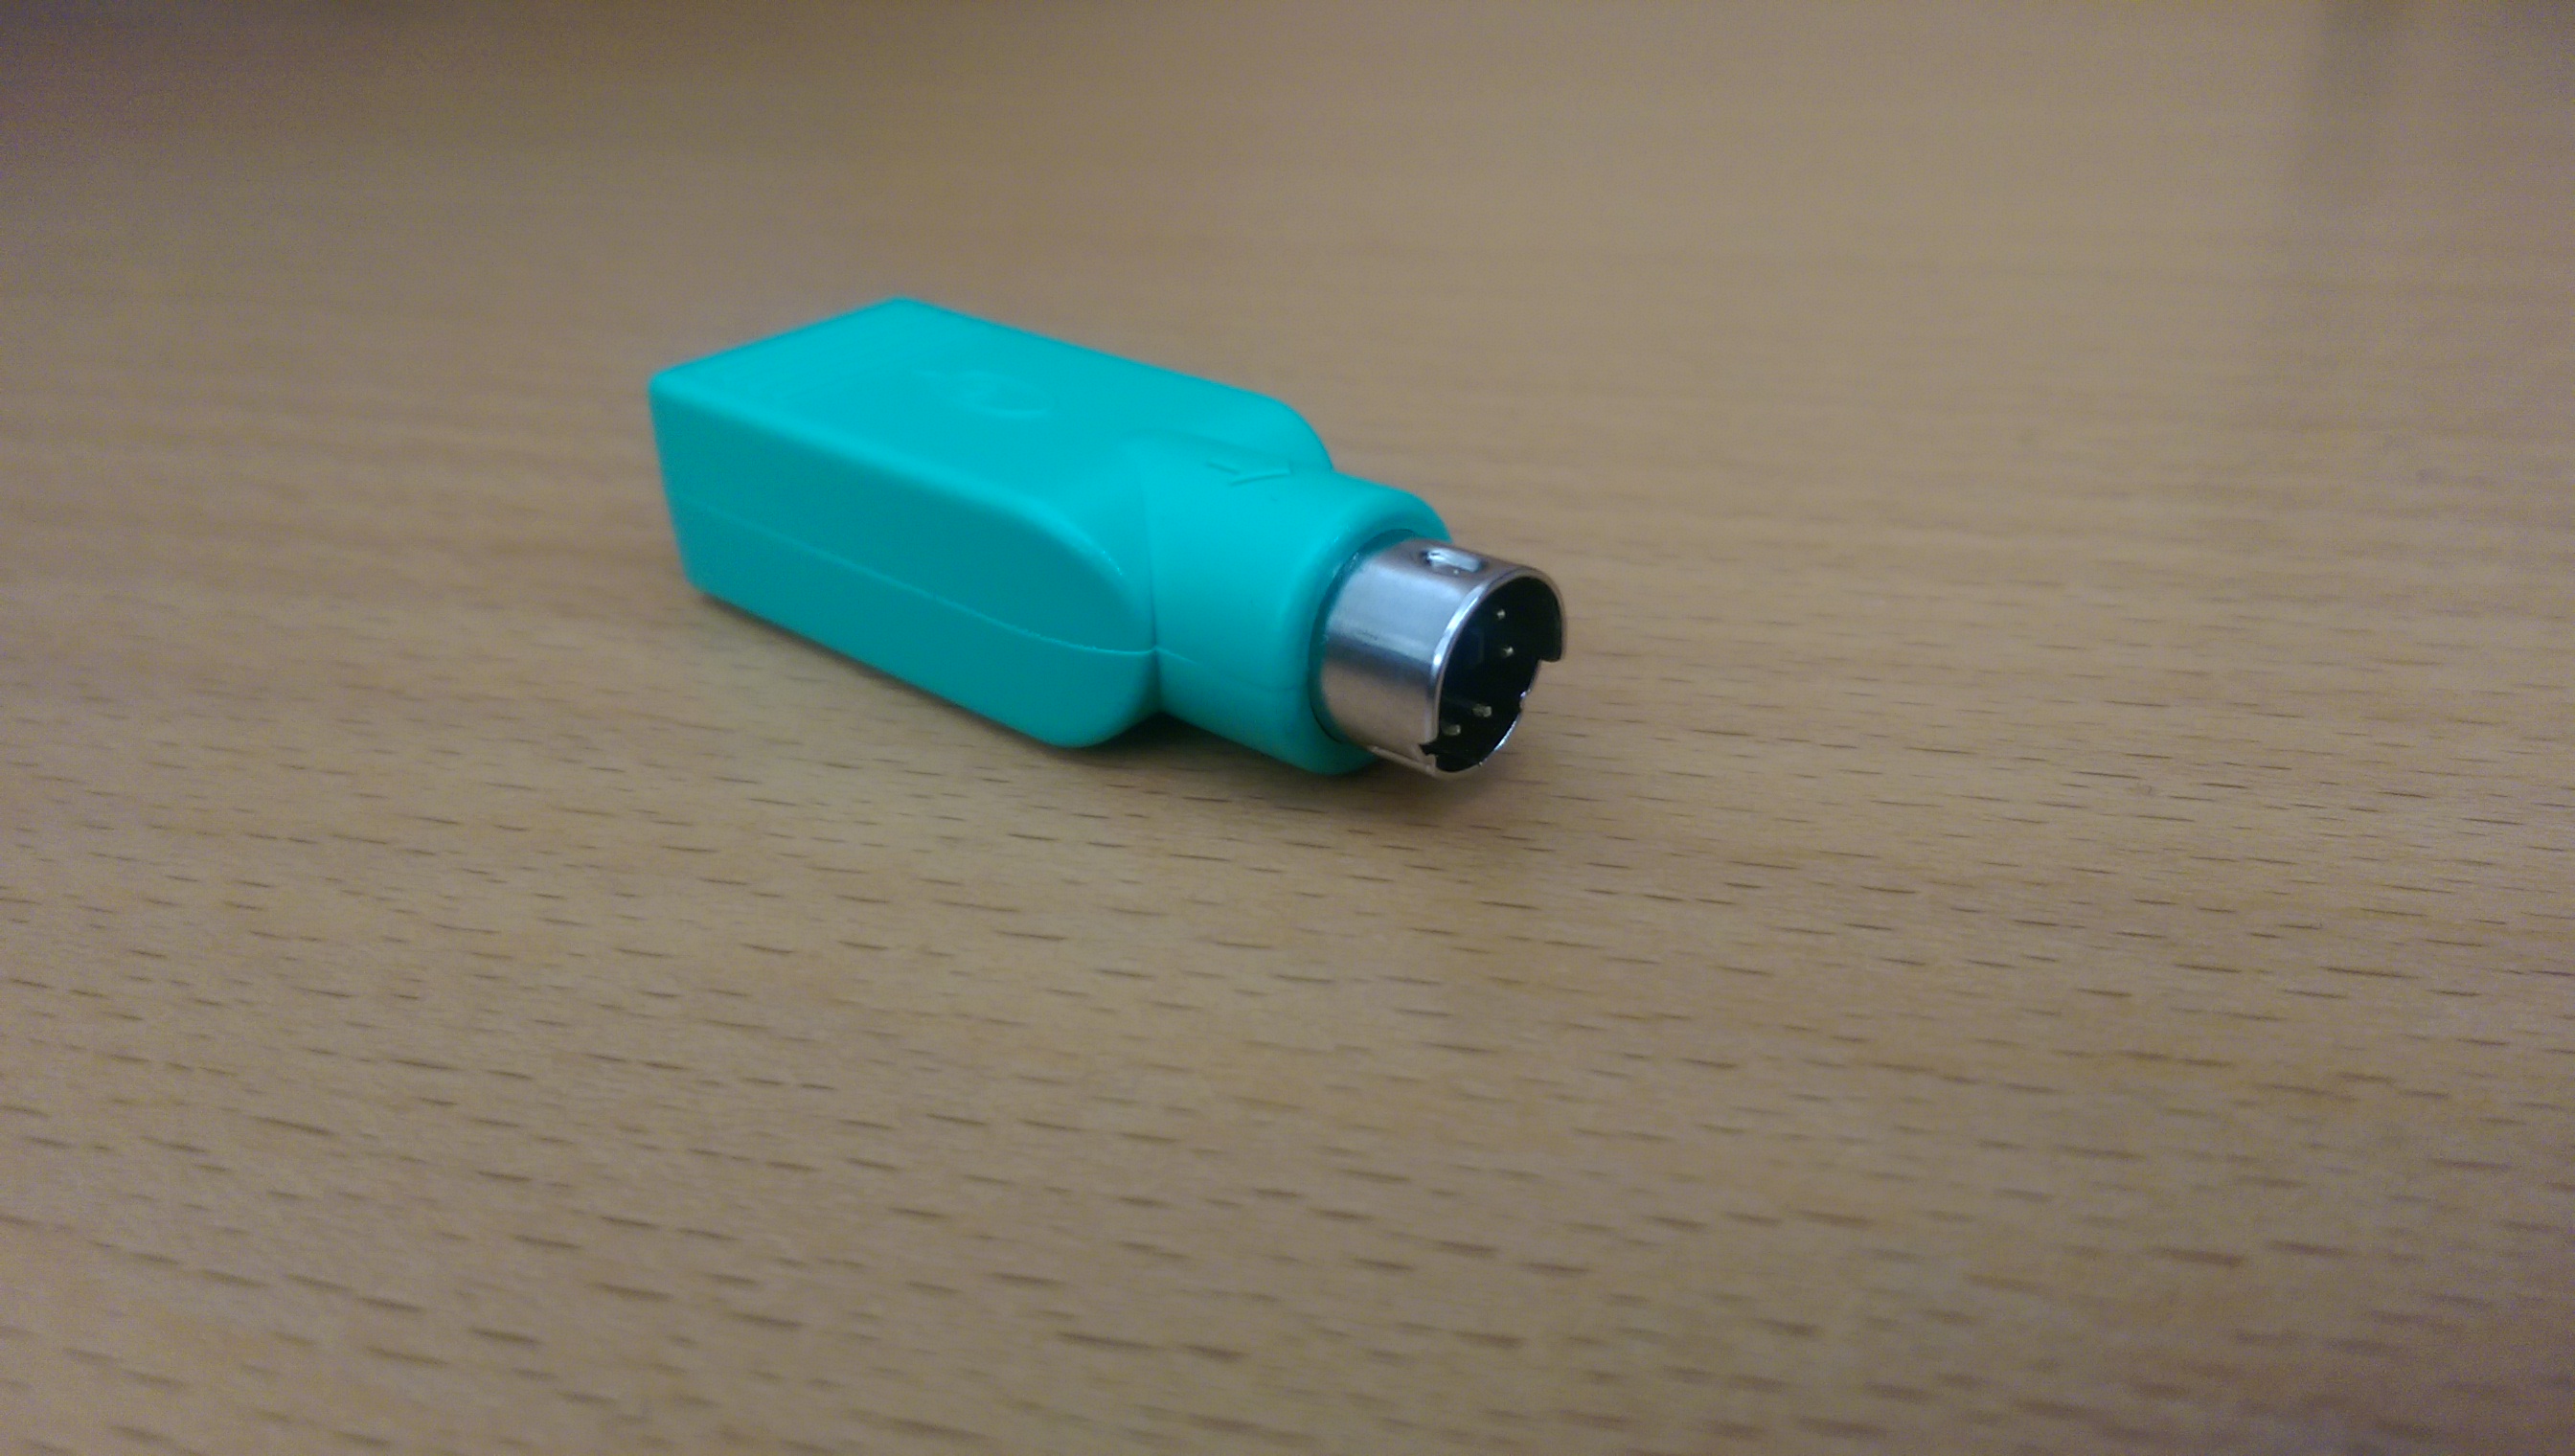 Ps2 to usb converter photo